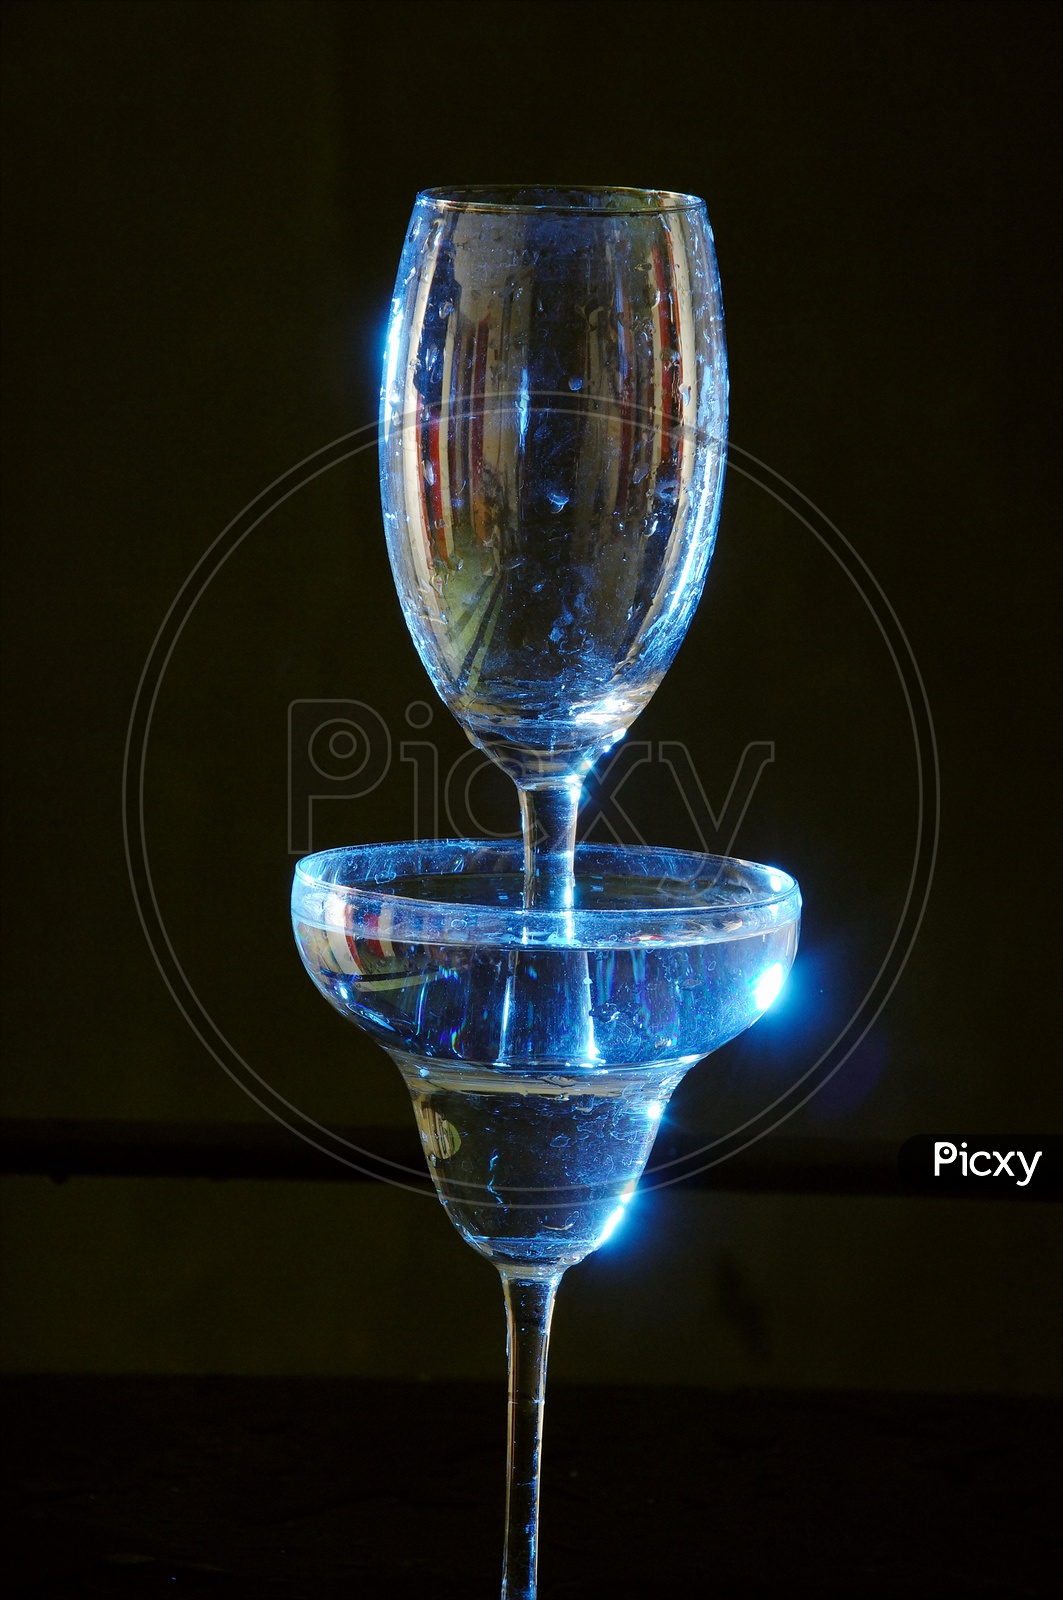 Water being poured in the wine glass